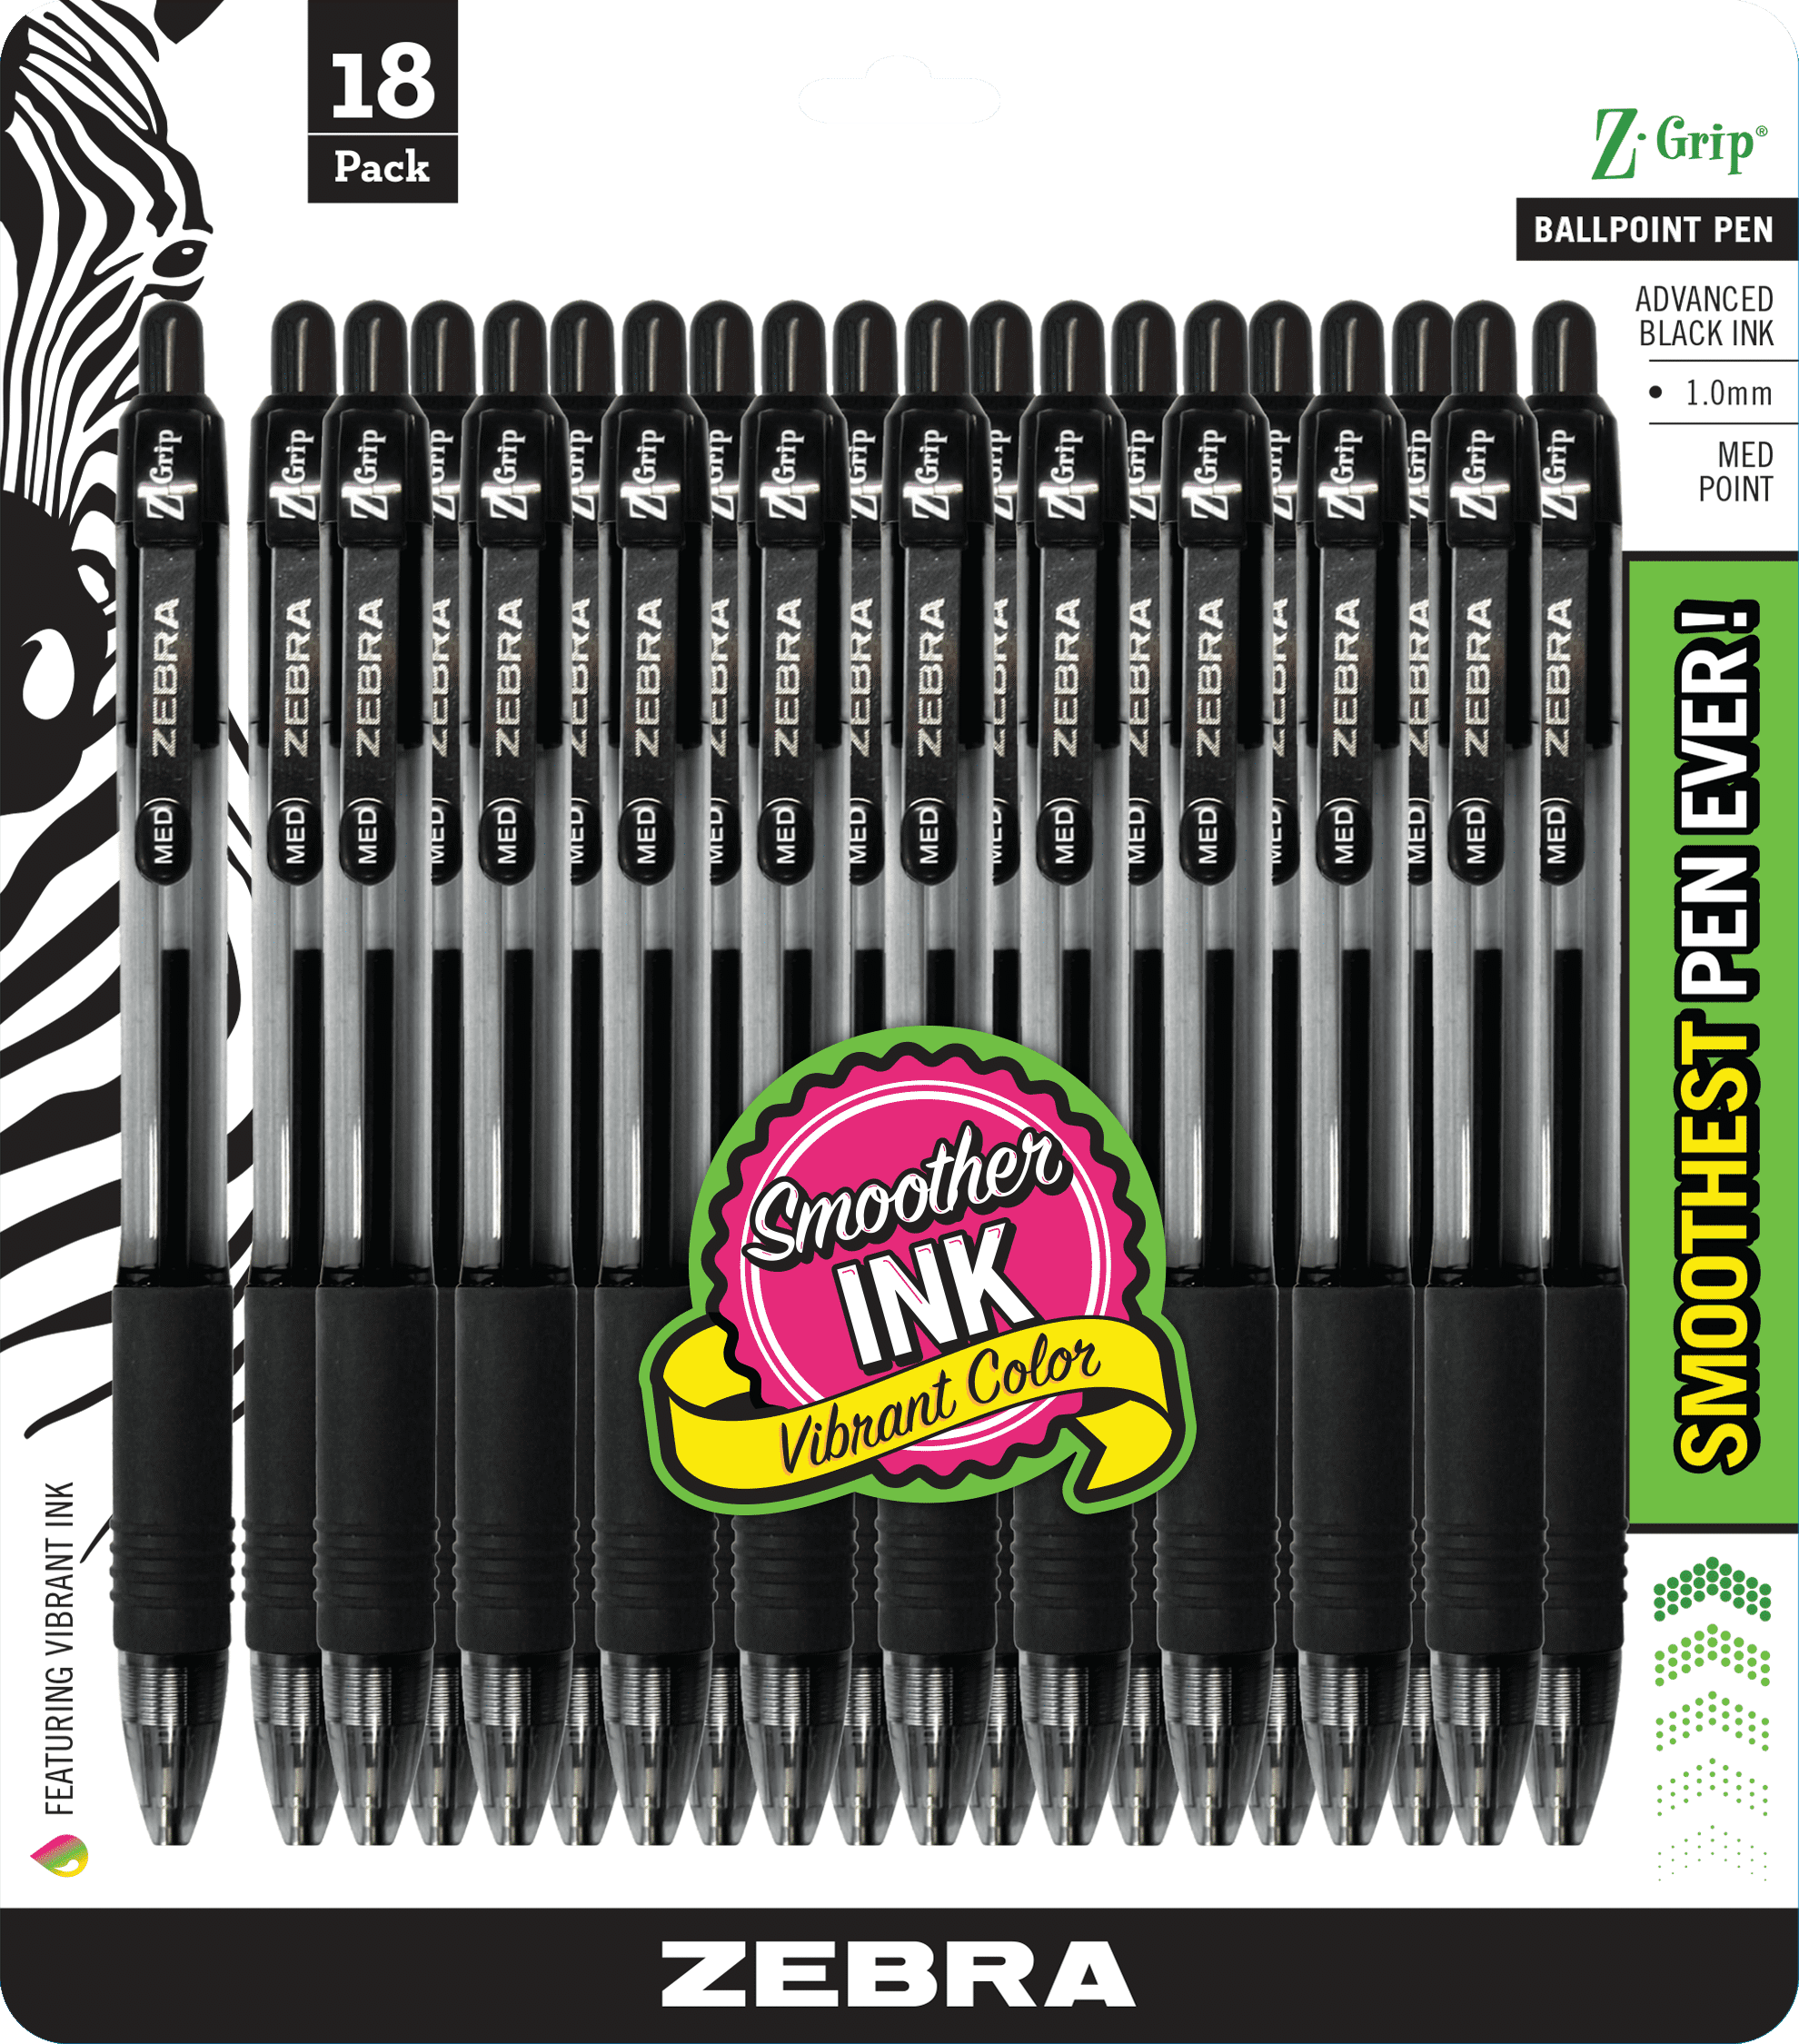 Black 100 x Z-Grip Retractable Ballpoint Pen Economy Pack in Branded Boxes 